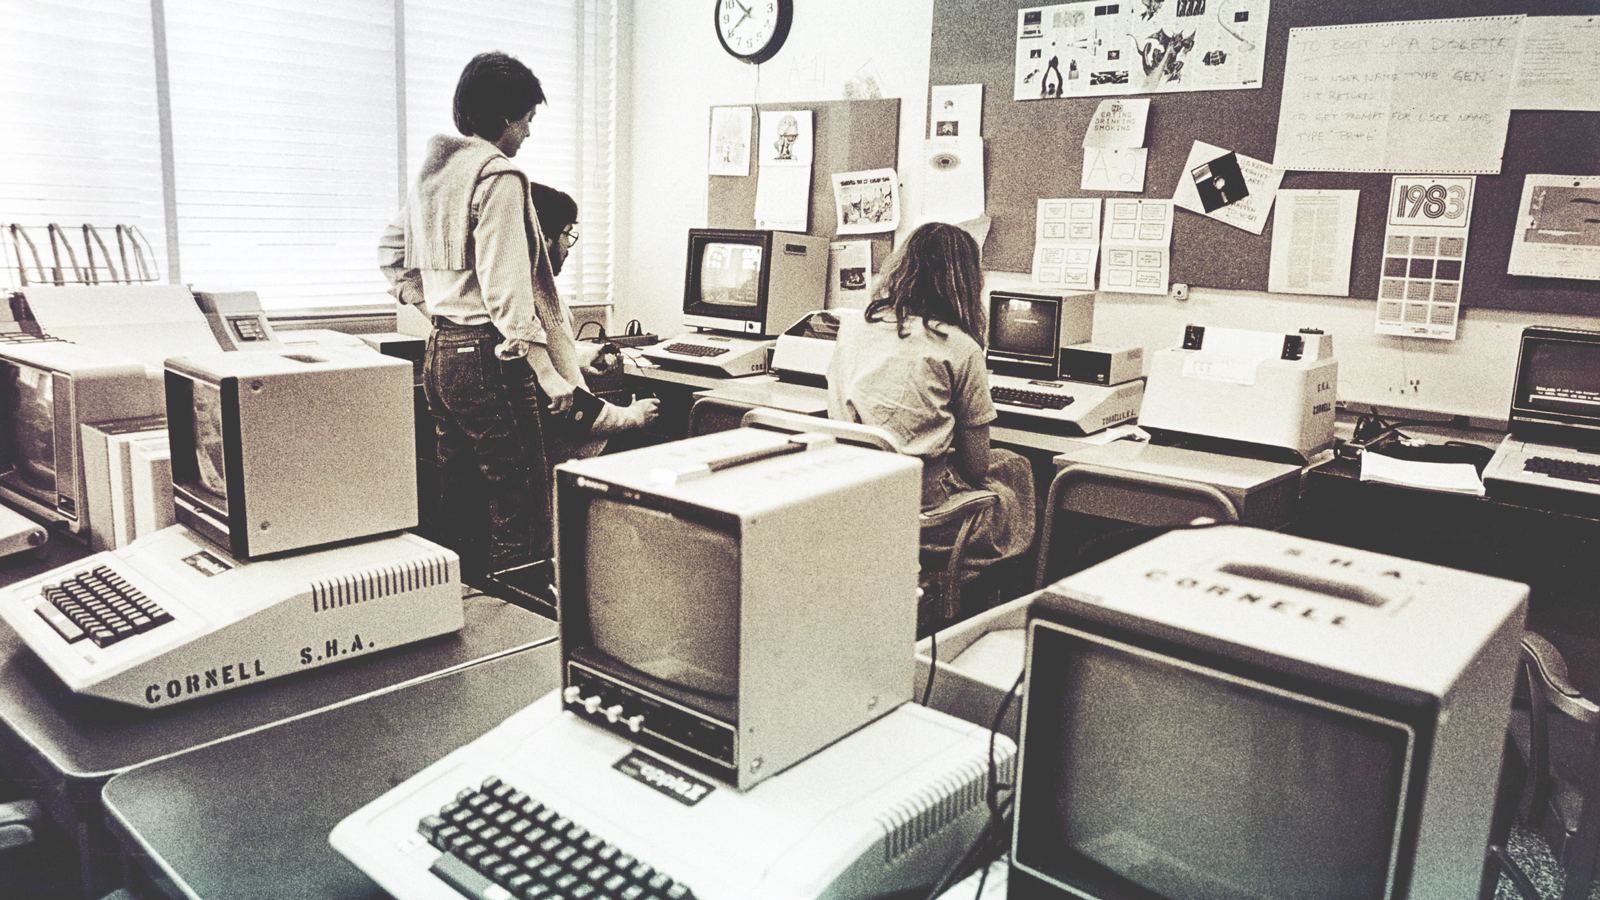 A new computer lab in 1983 heralded the school’s curriculum expansion into operations research and more